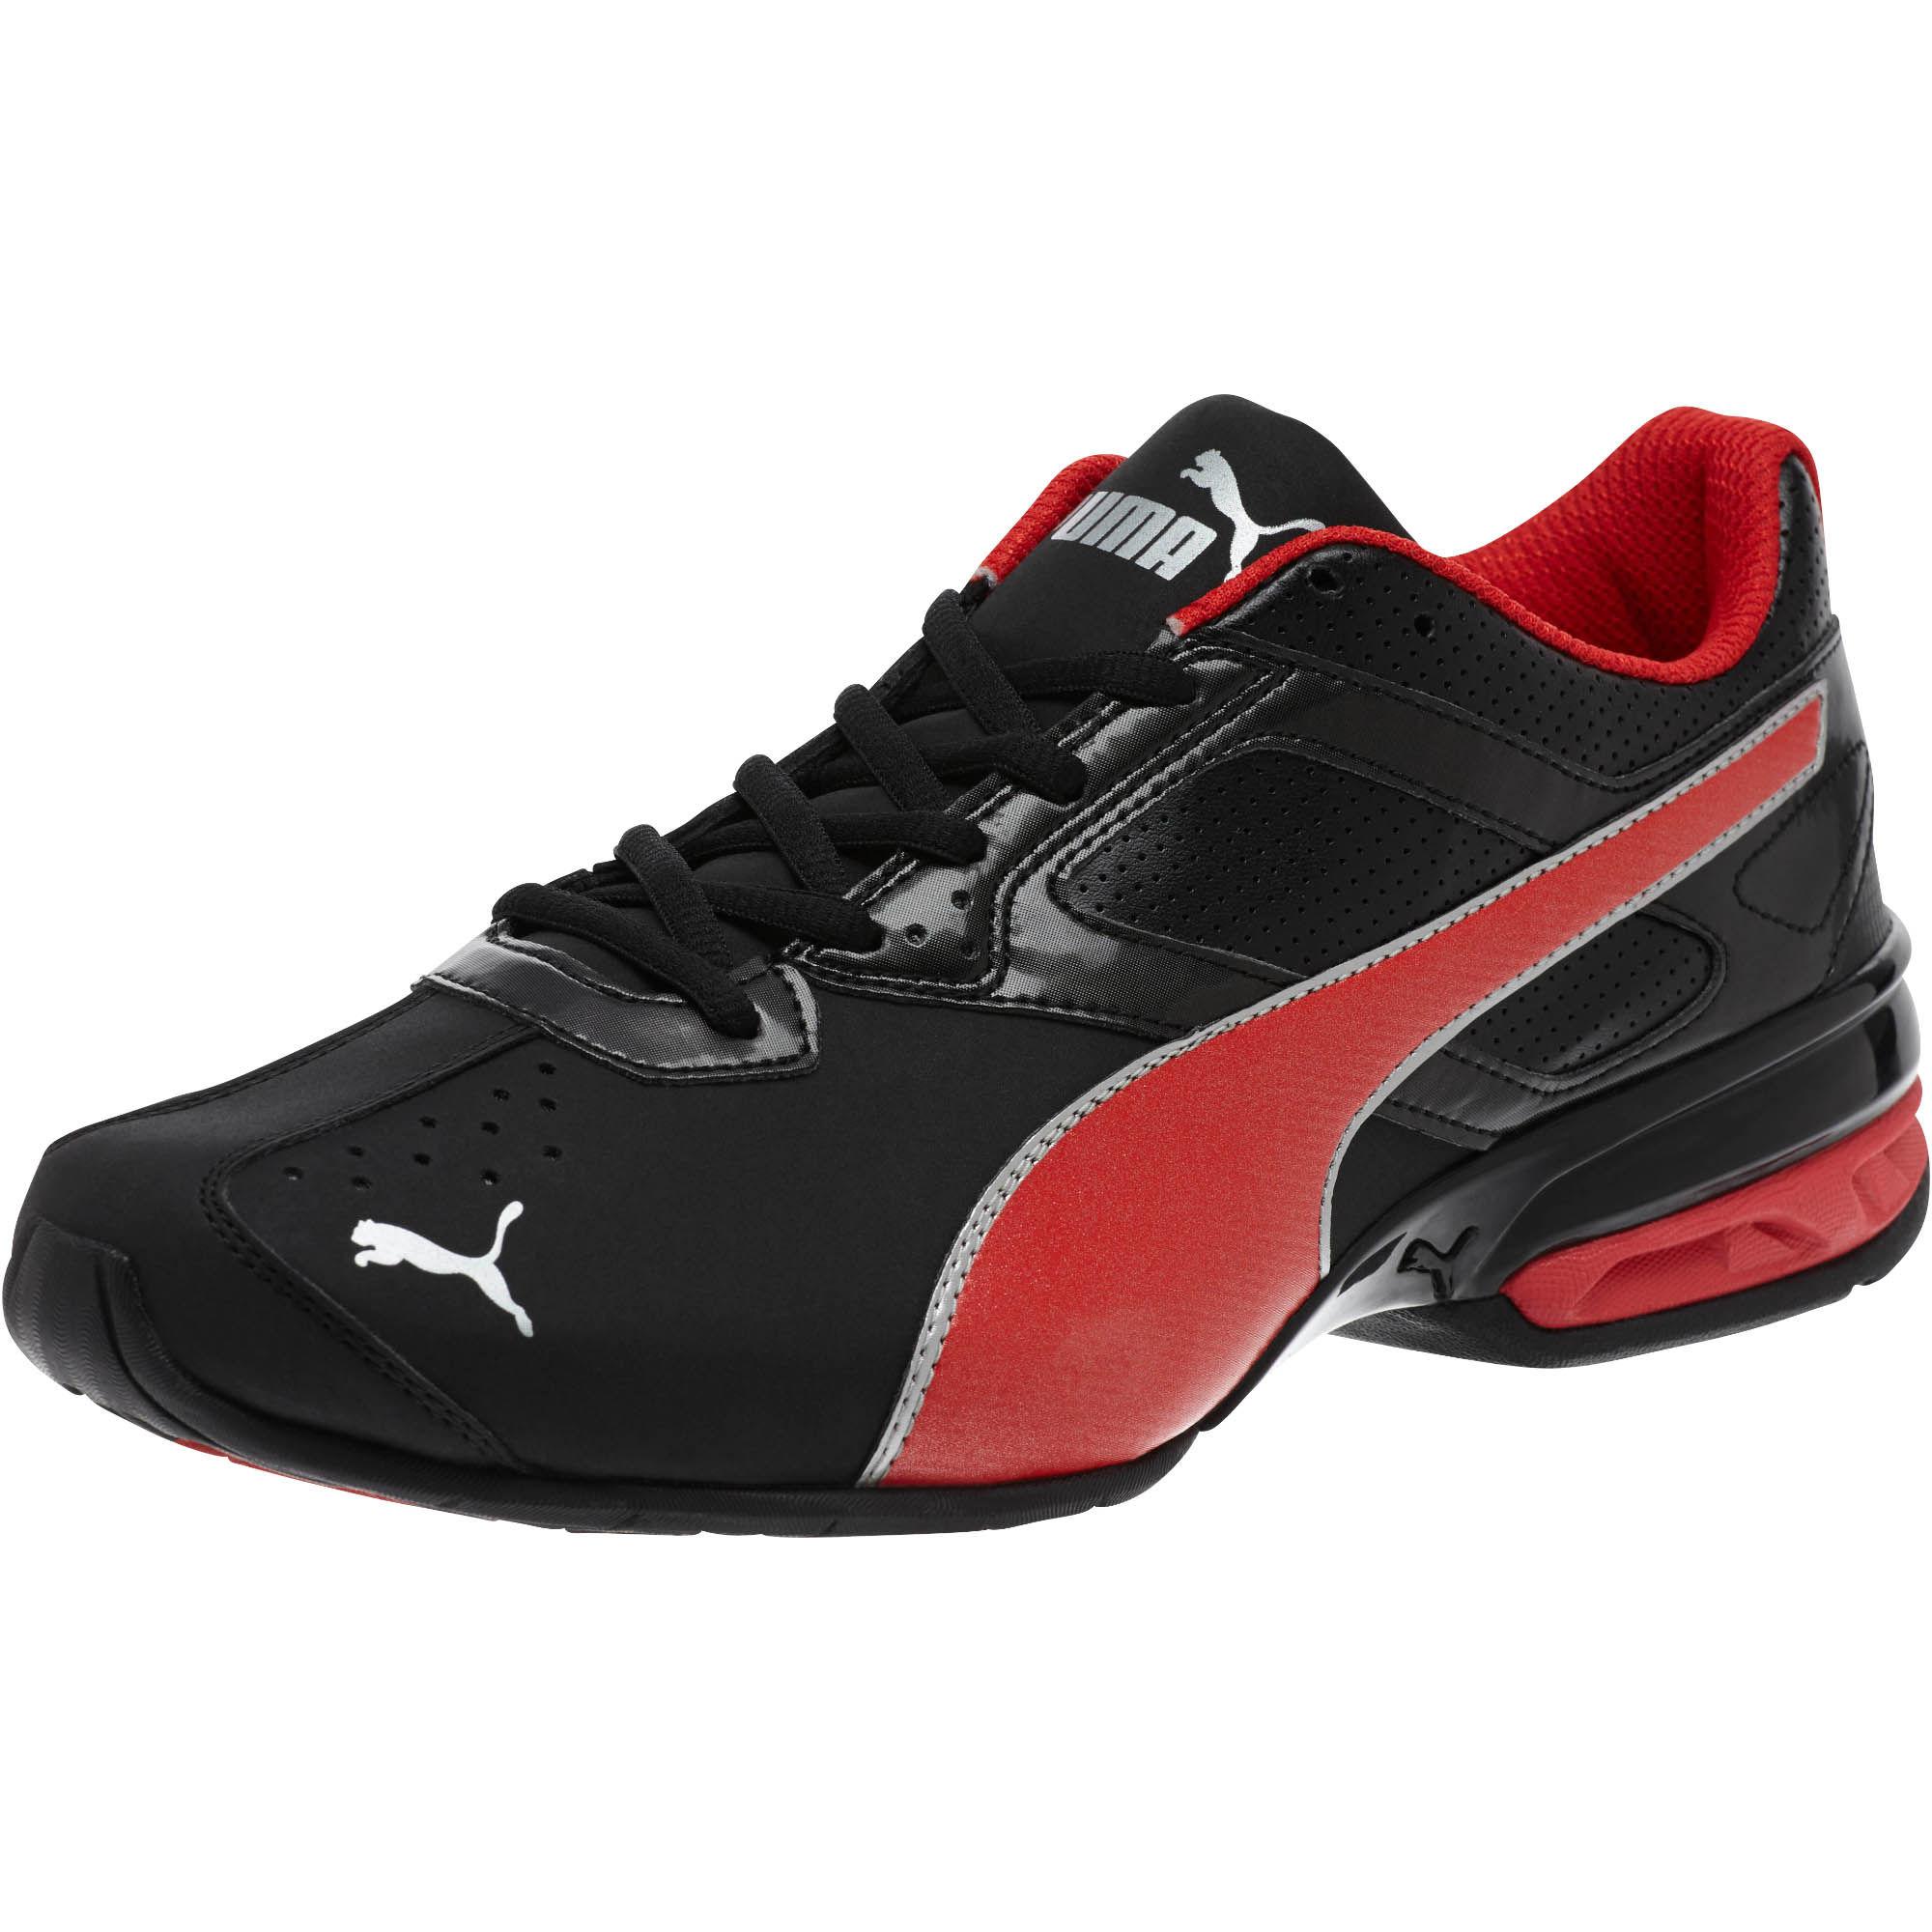 PUMA Synthetic Tazon 6 Fm Men's Running Shoes for Men - Lyst